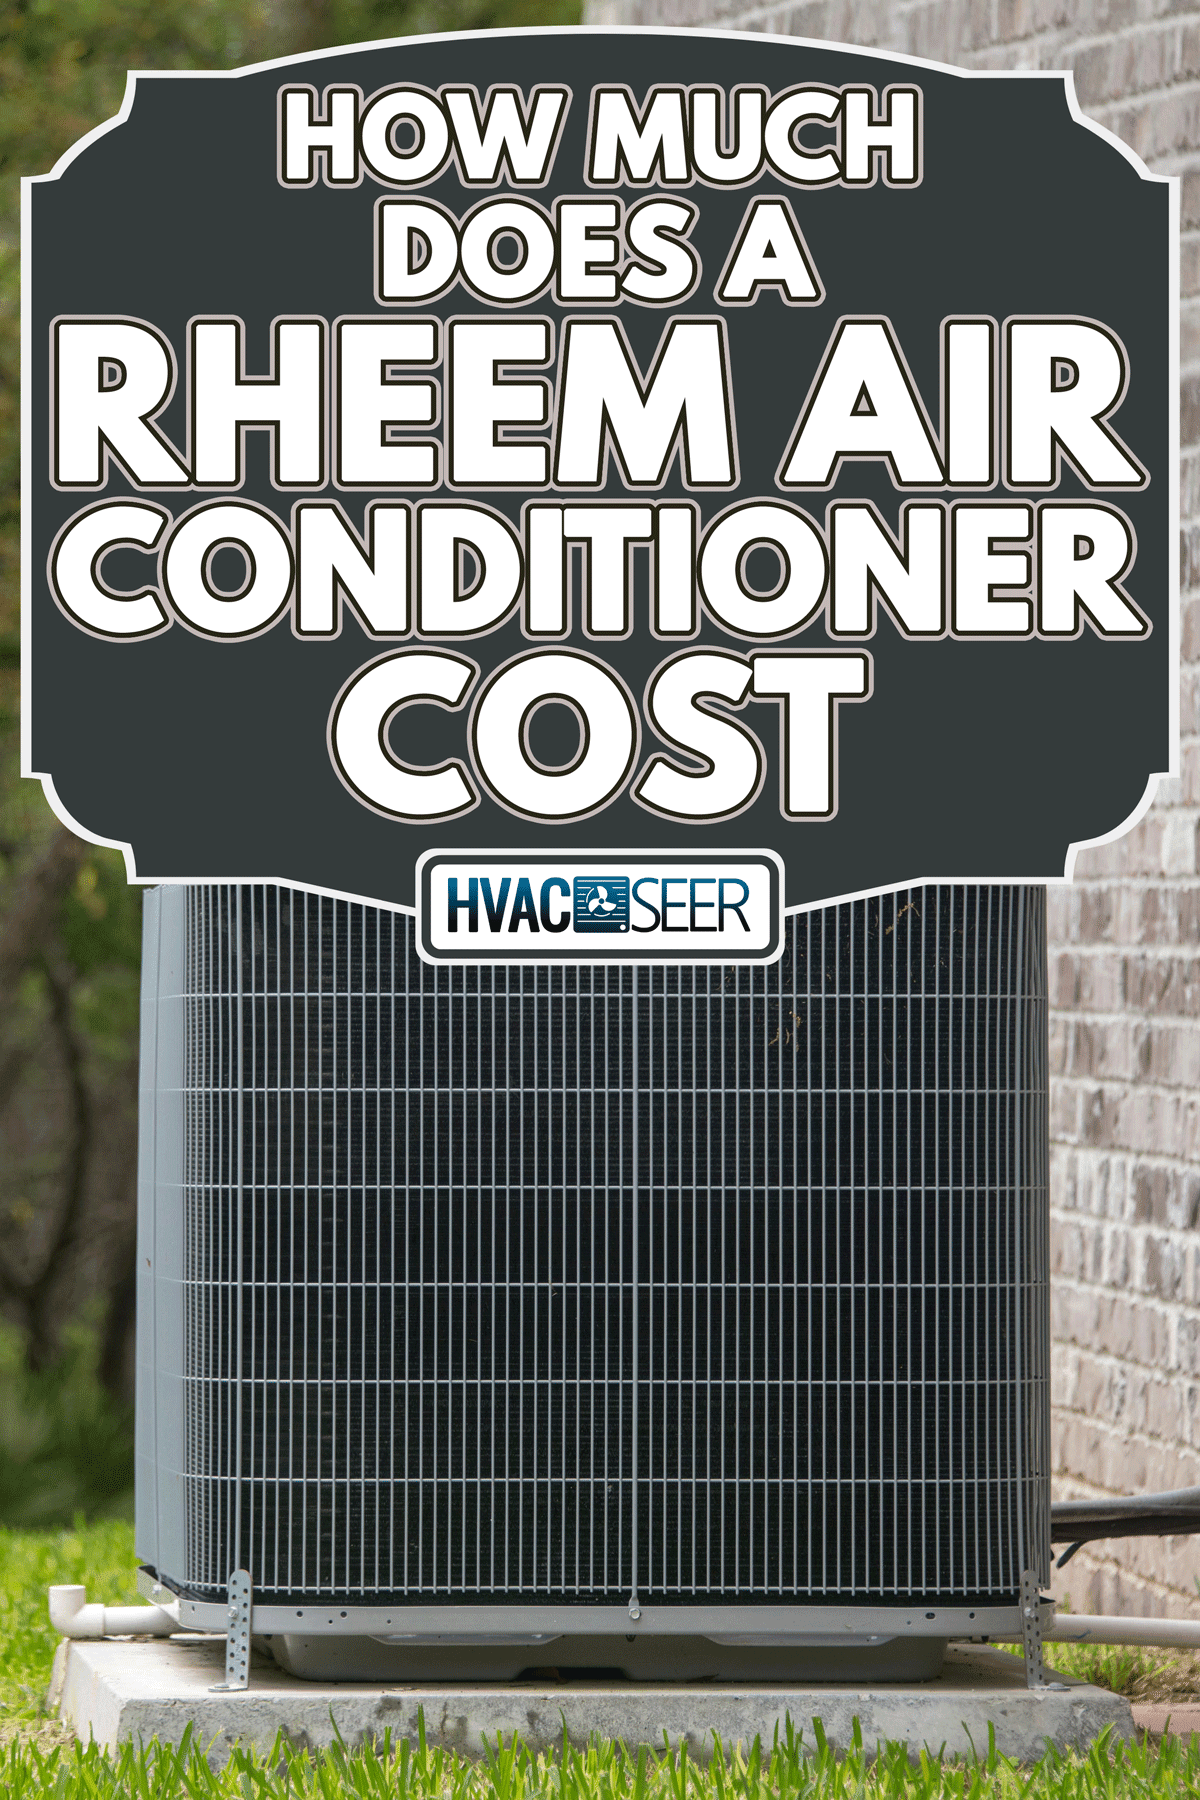 HVAC Air conditioning unit on concrete slap, How Much Does A Rheem Air Conditioner Cost